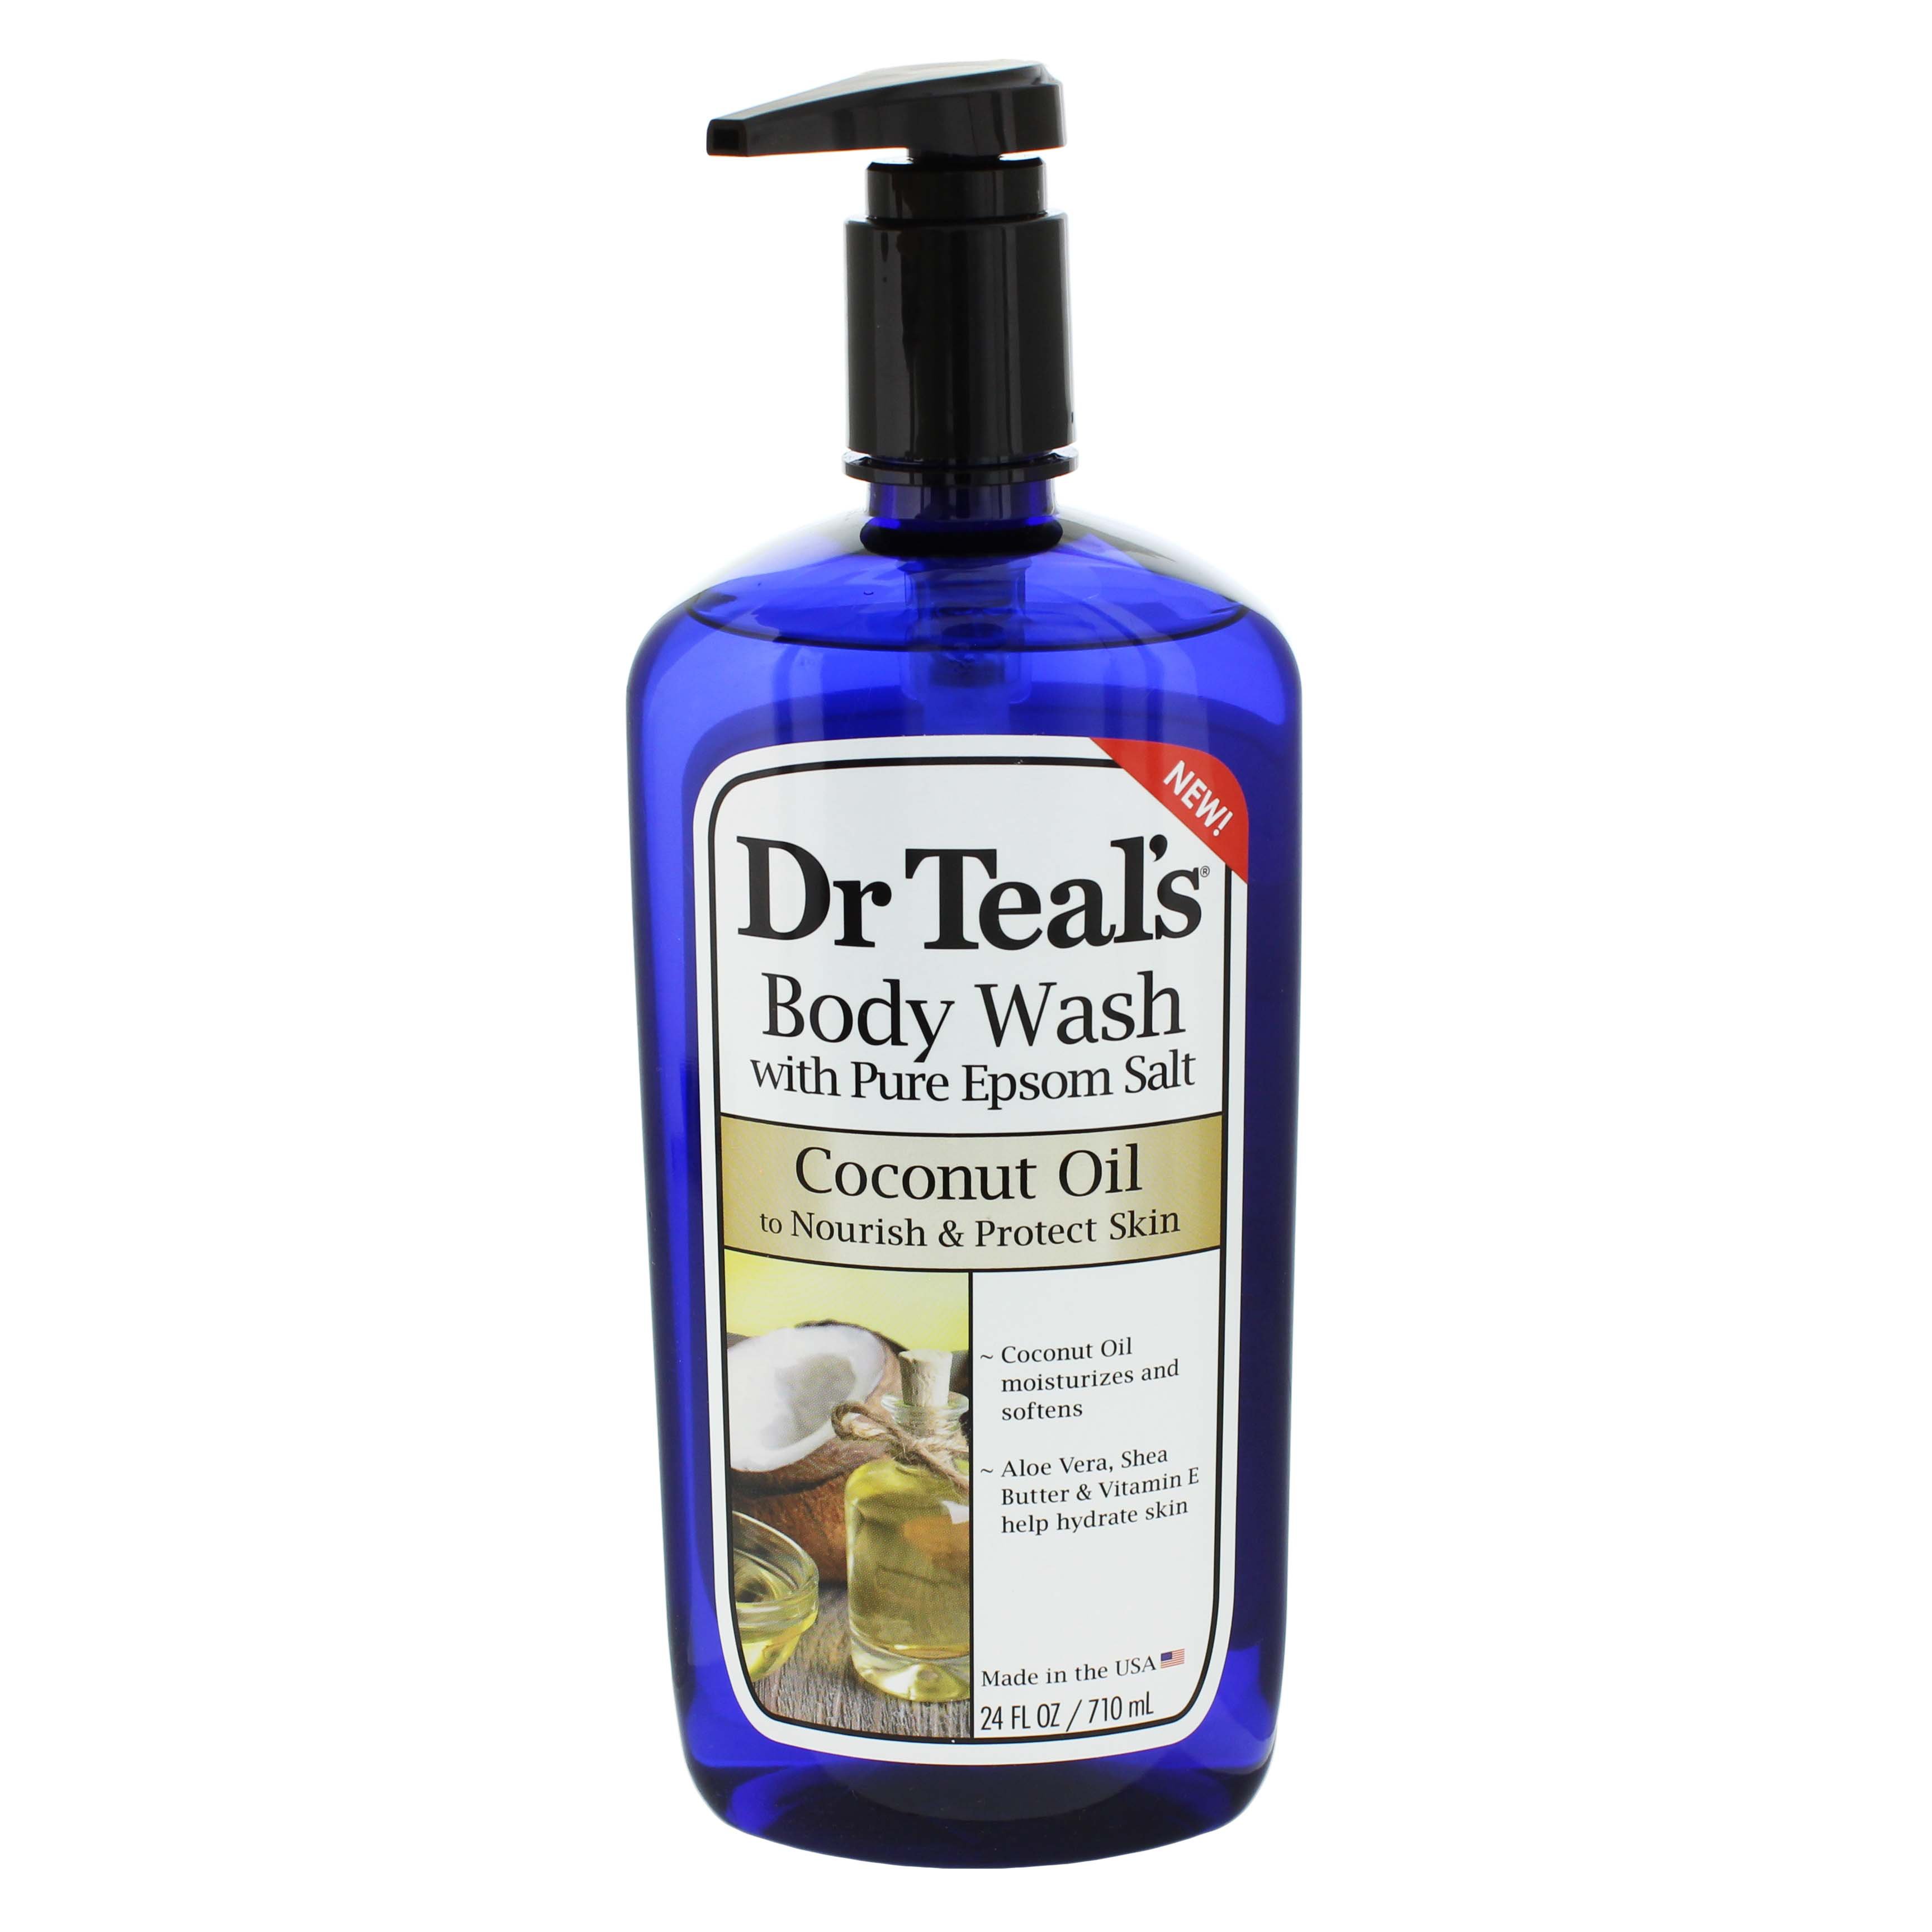 Dr Teals Coconut Oil Body Wash Shop Cleansers And Soaps At H E B